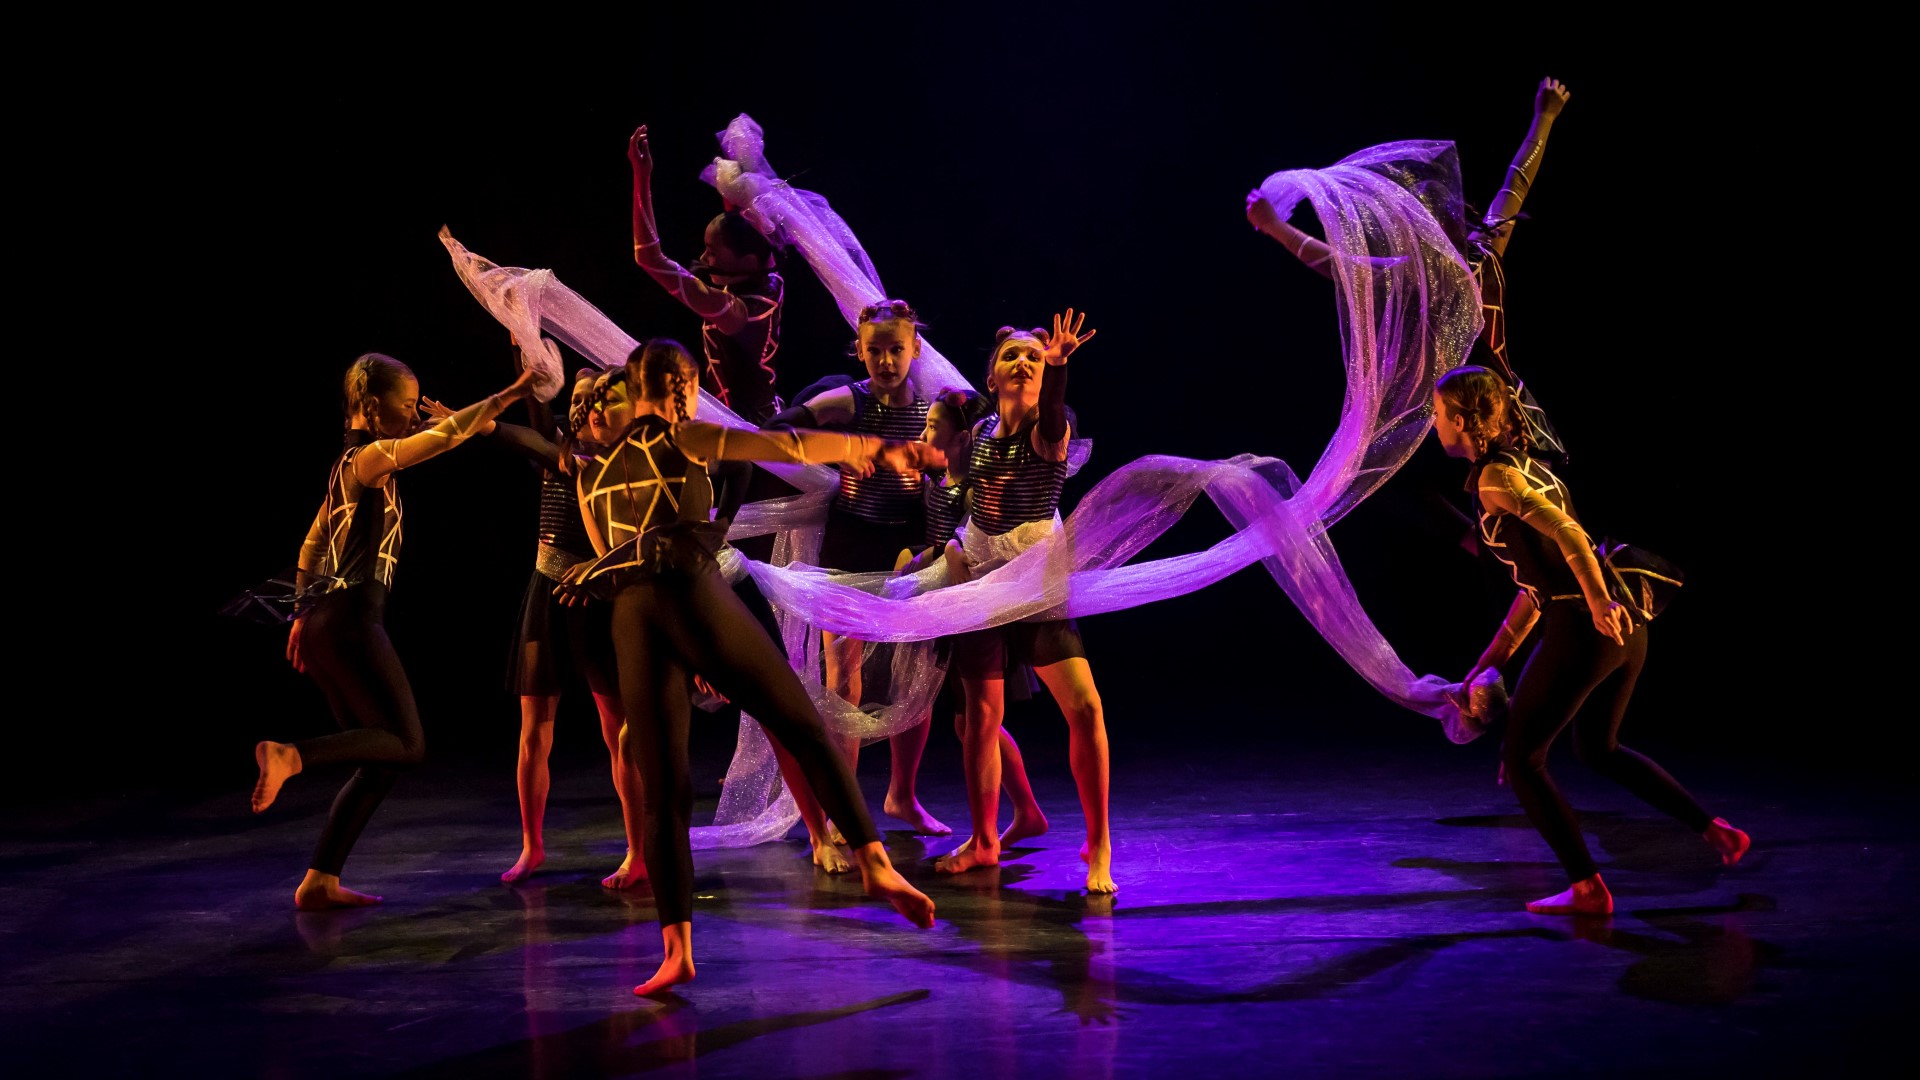 A scene from the performance of The Web, as part of the State Dance Festival 2019